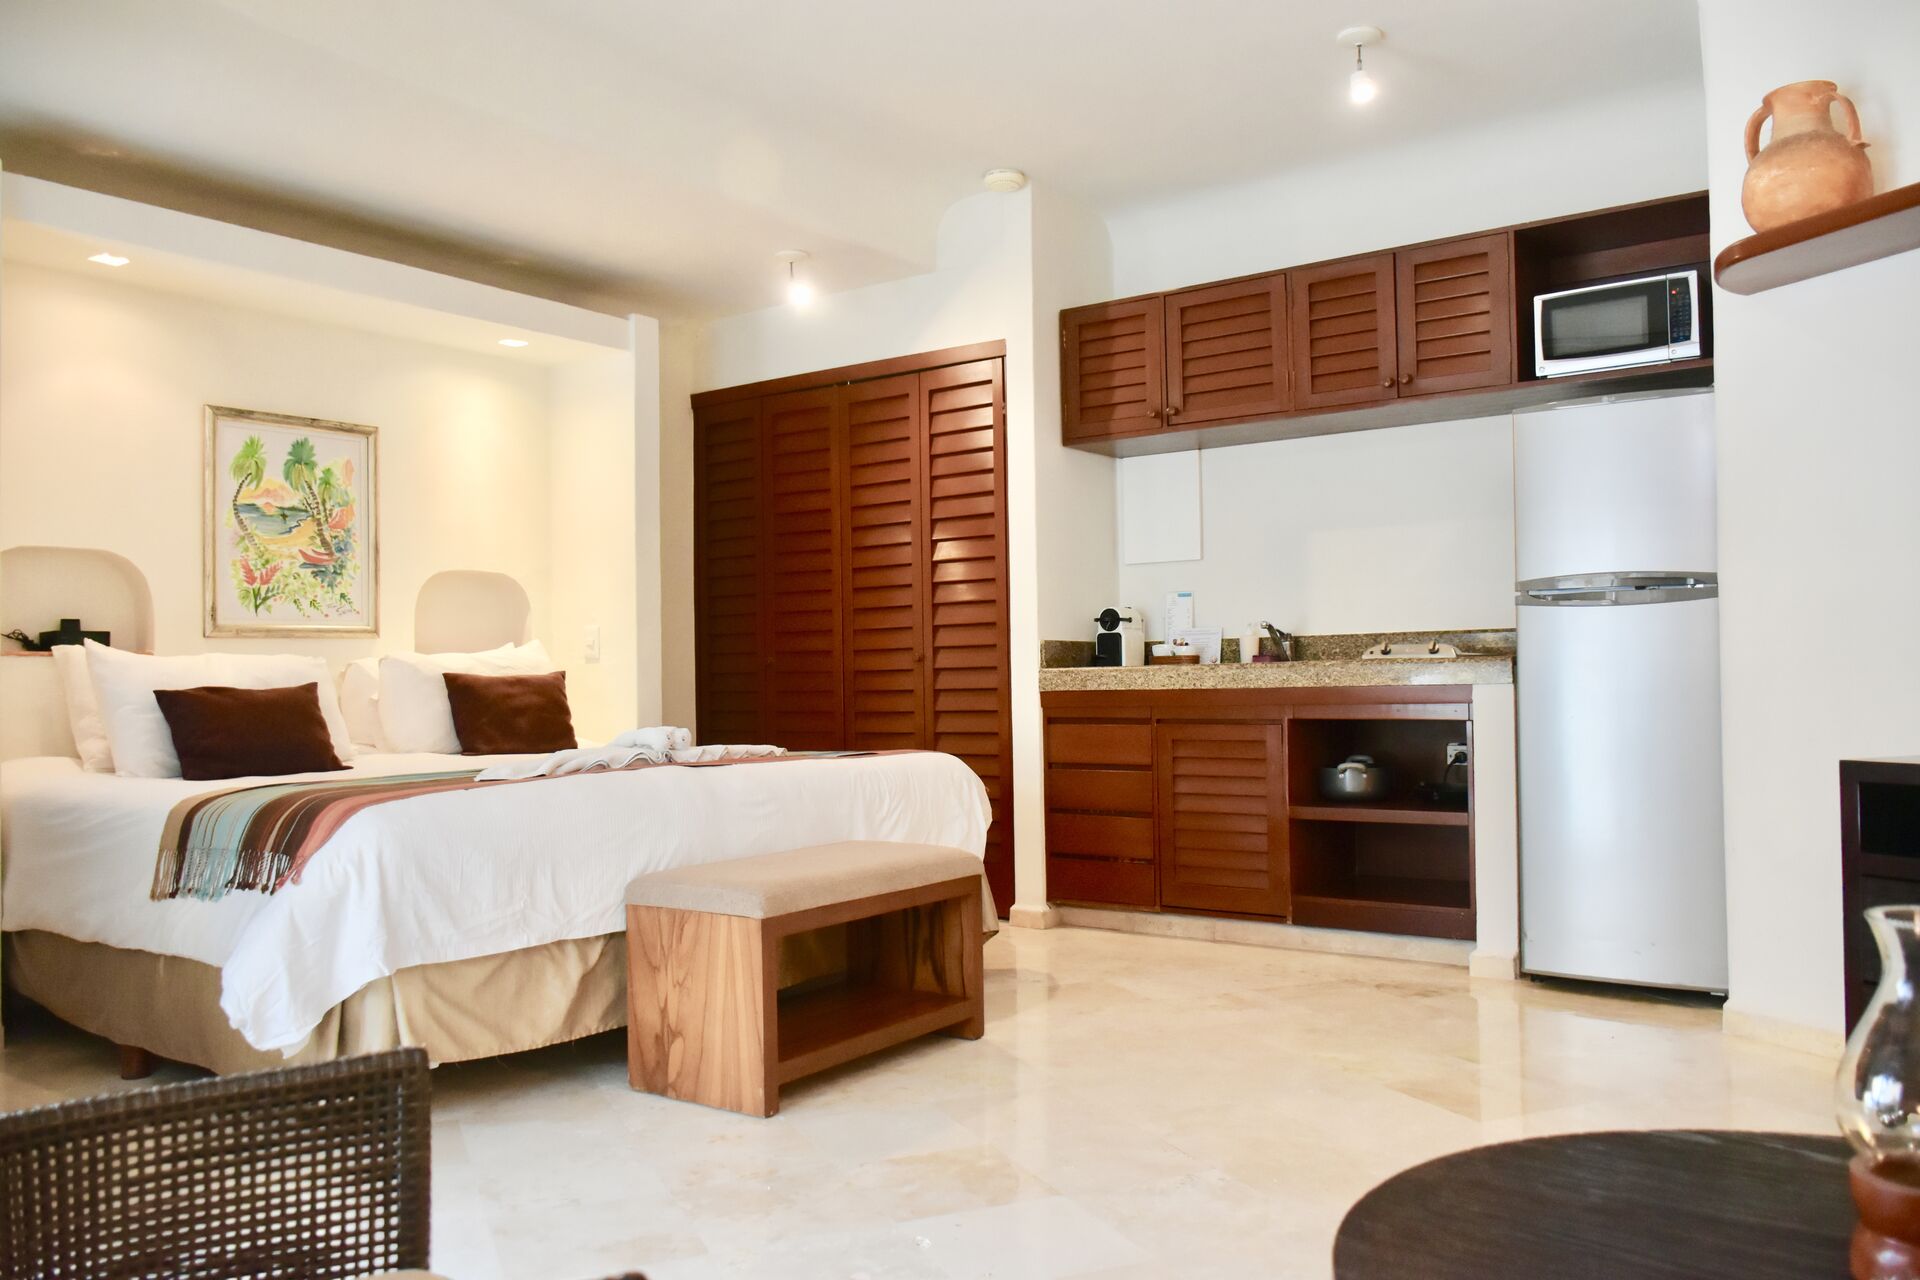 Ocean view room with king size bed and kitchenette.